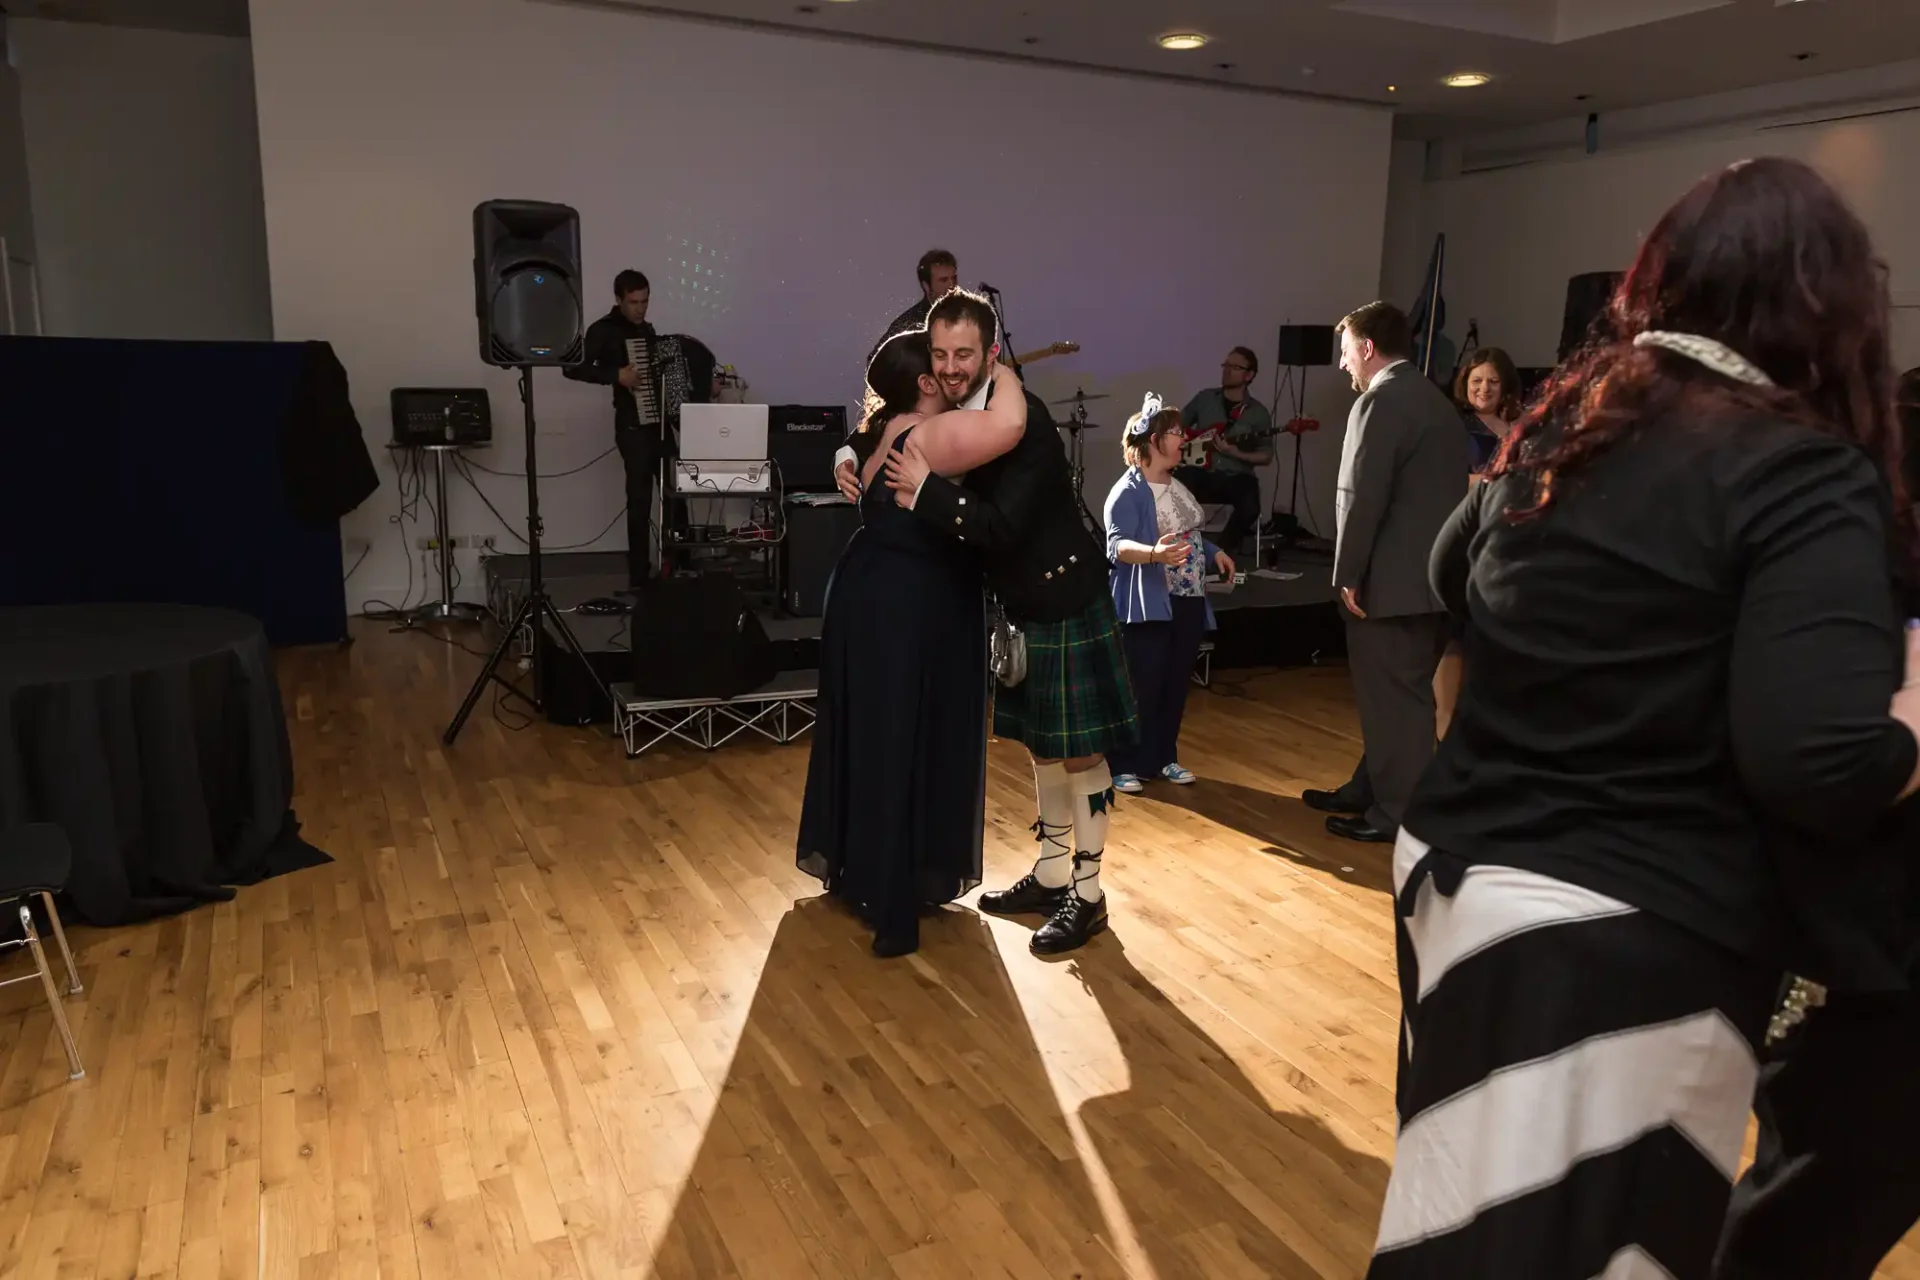 A couple dancing joyfully at a lively indoor event while a band performs in the background and others watch.